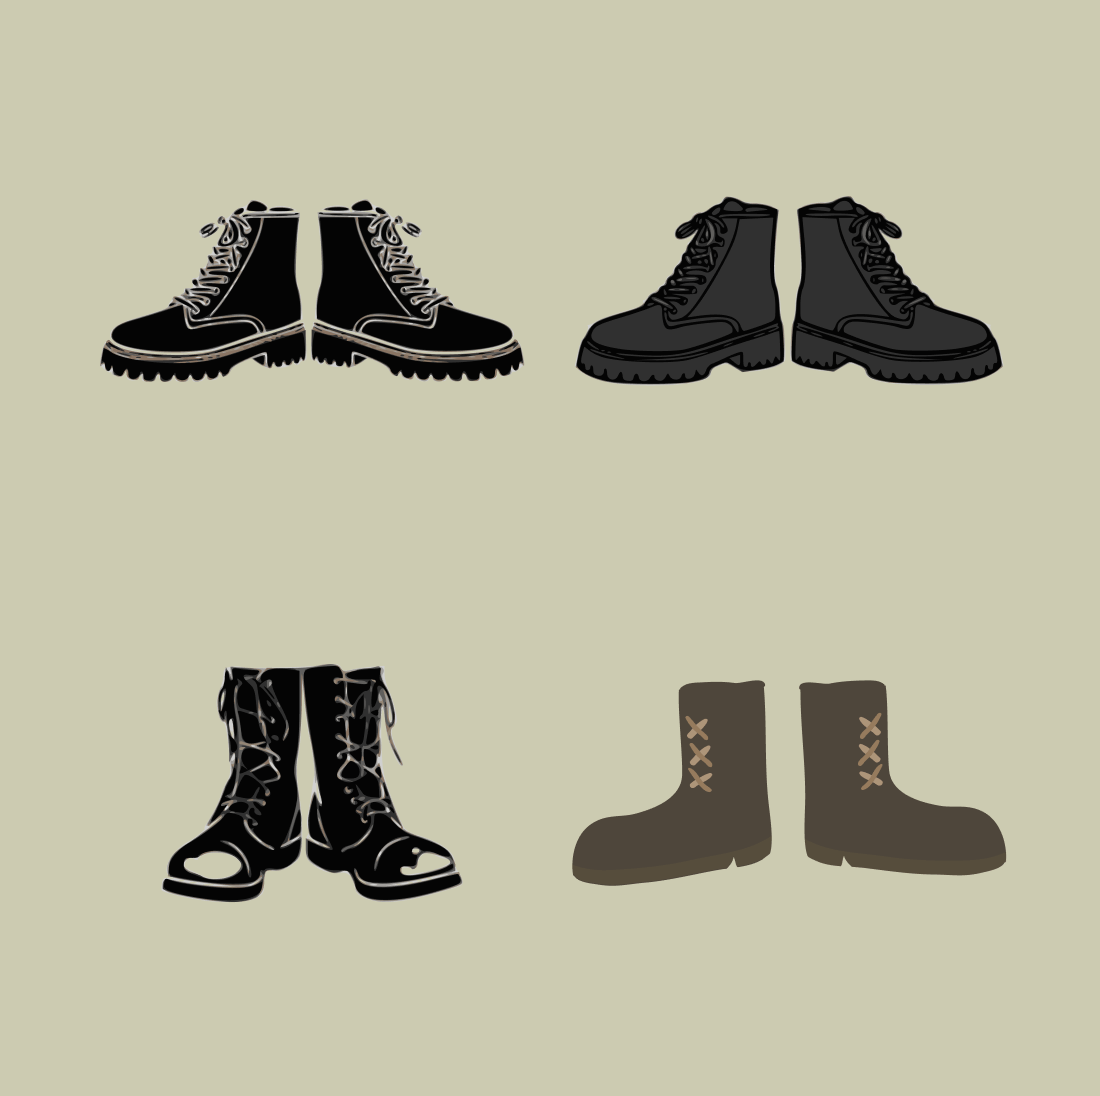 Military boots with laces.